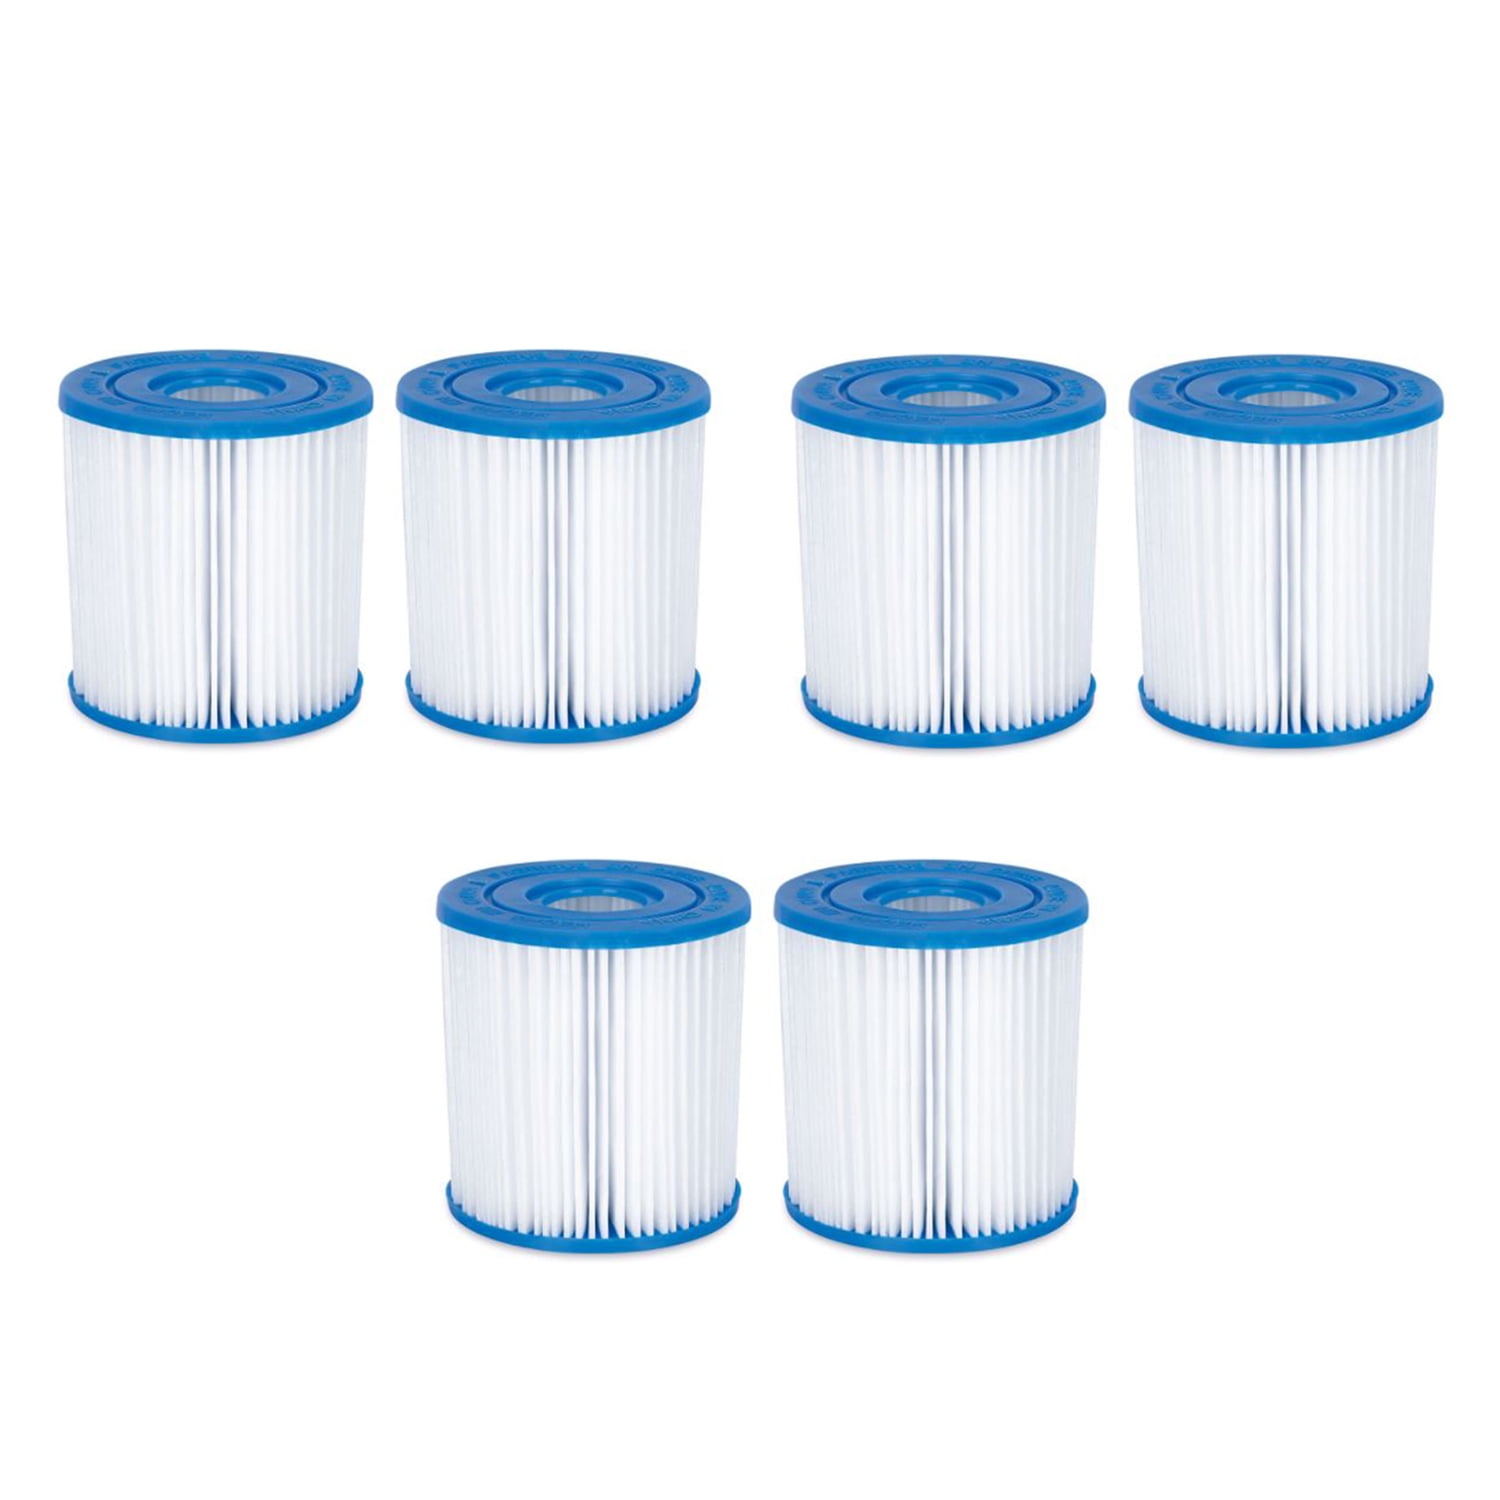 6pcs Swimming Pool Filter Fit For Lay Z Spa Bestway 58323E Hot Tub 